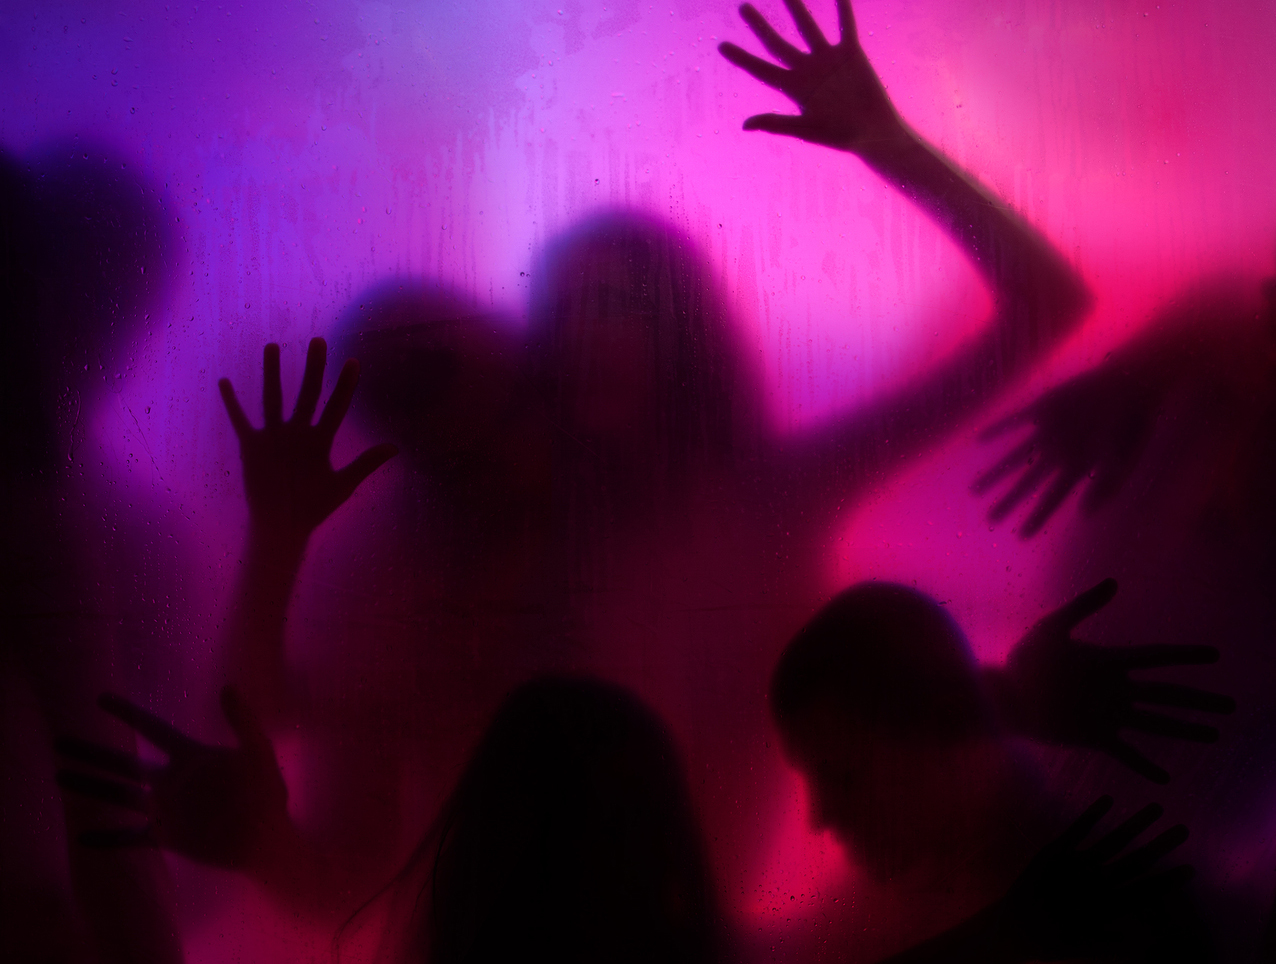 Group of naked people in silhouette behind frosted, translucent glass lit with purple and pink lights engaging in sexual activity